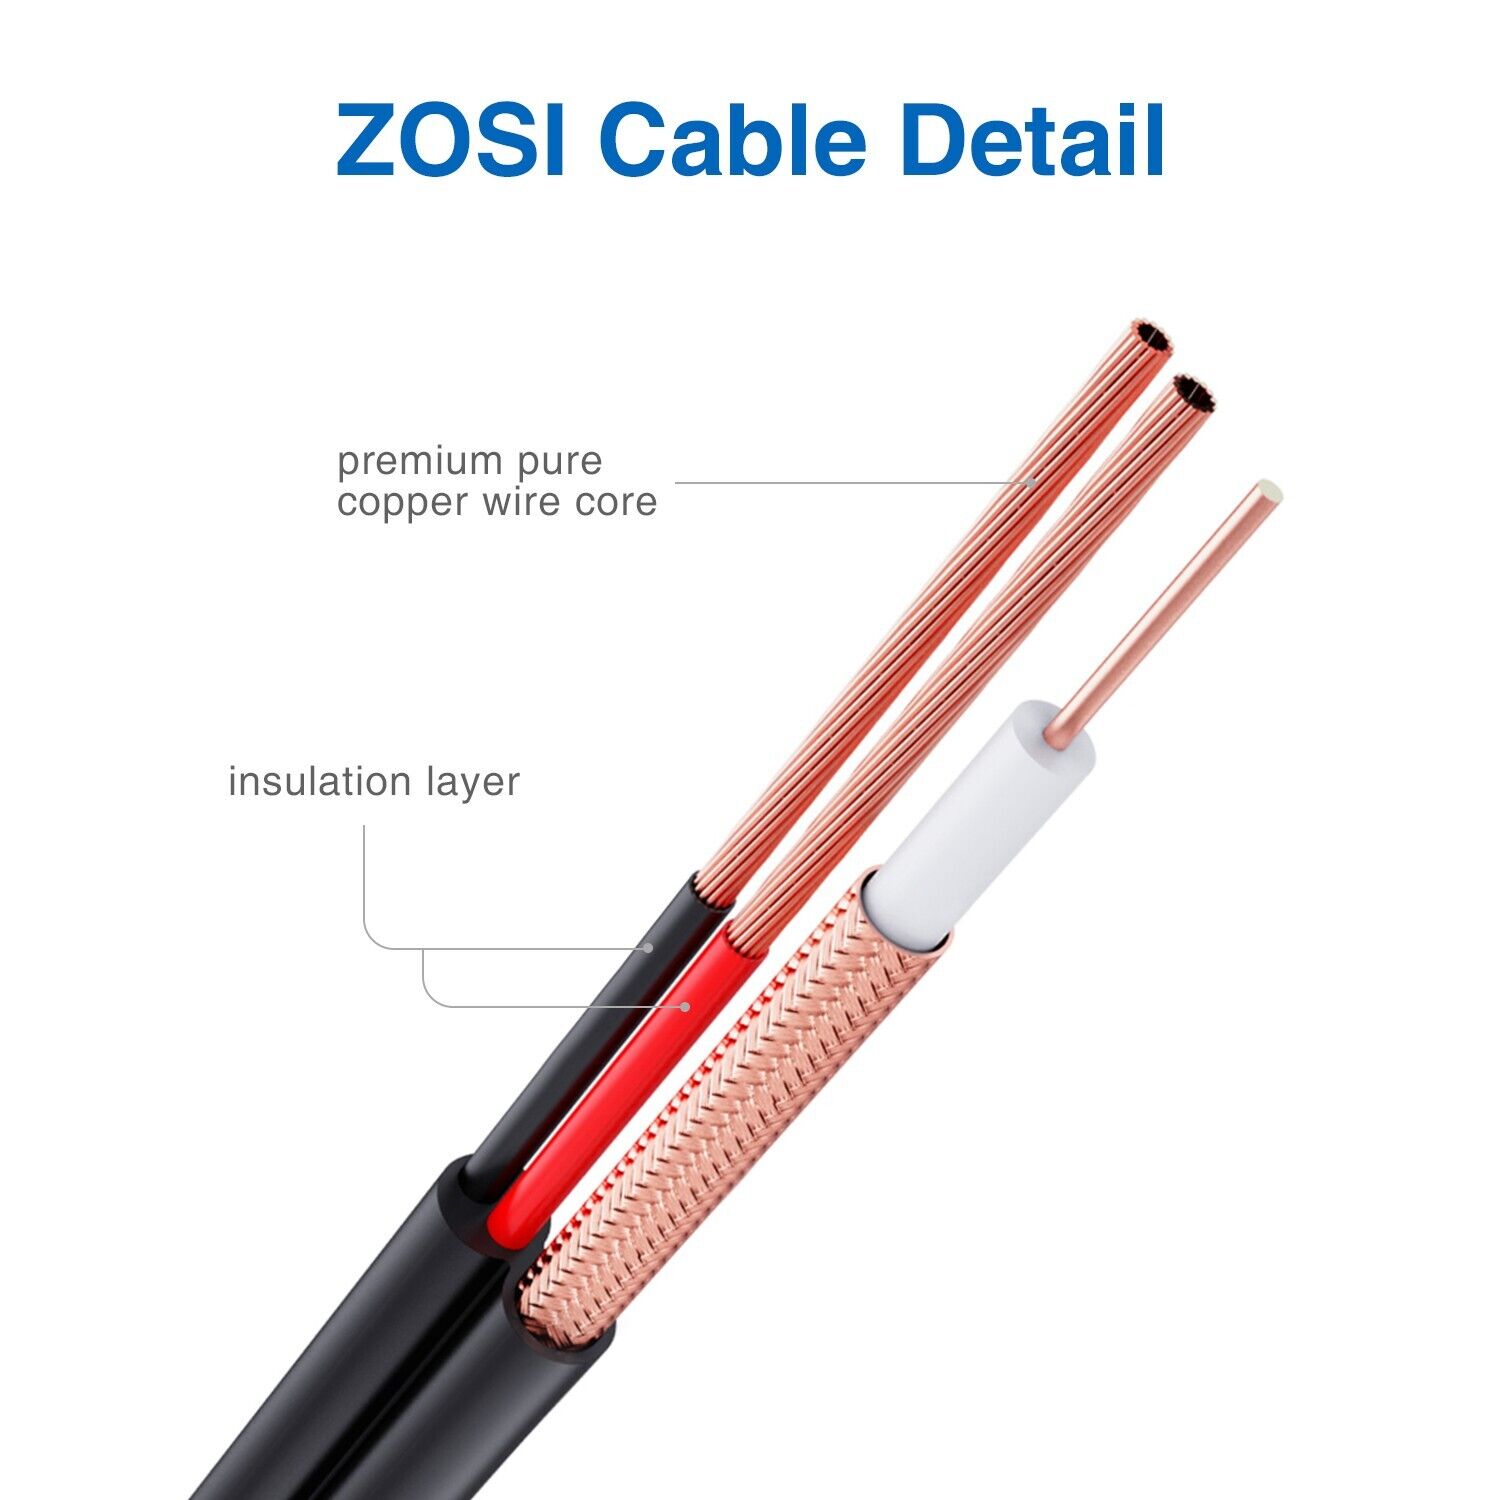 ZOSI 2X 60FT 18M BNC Cable CoopeR Power for 4K CCTV Camera DVR Security System ZOSI Does Not Apply - фотография #7